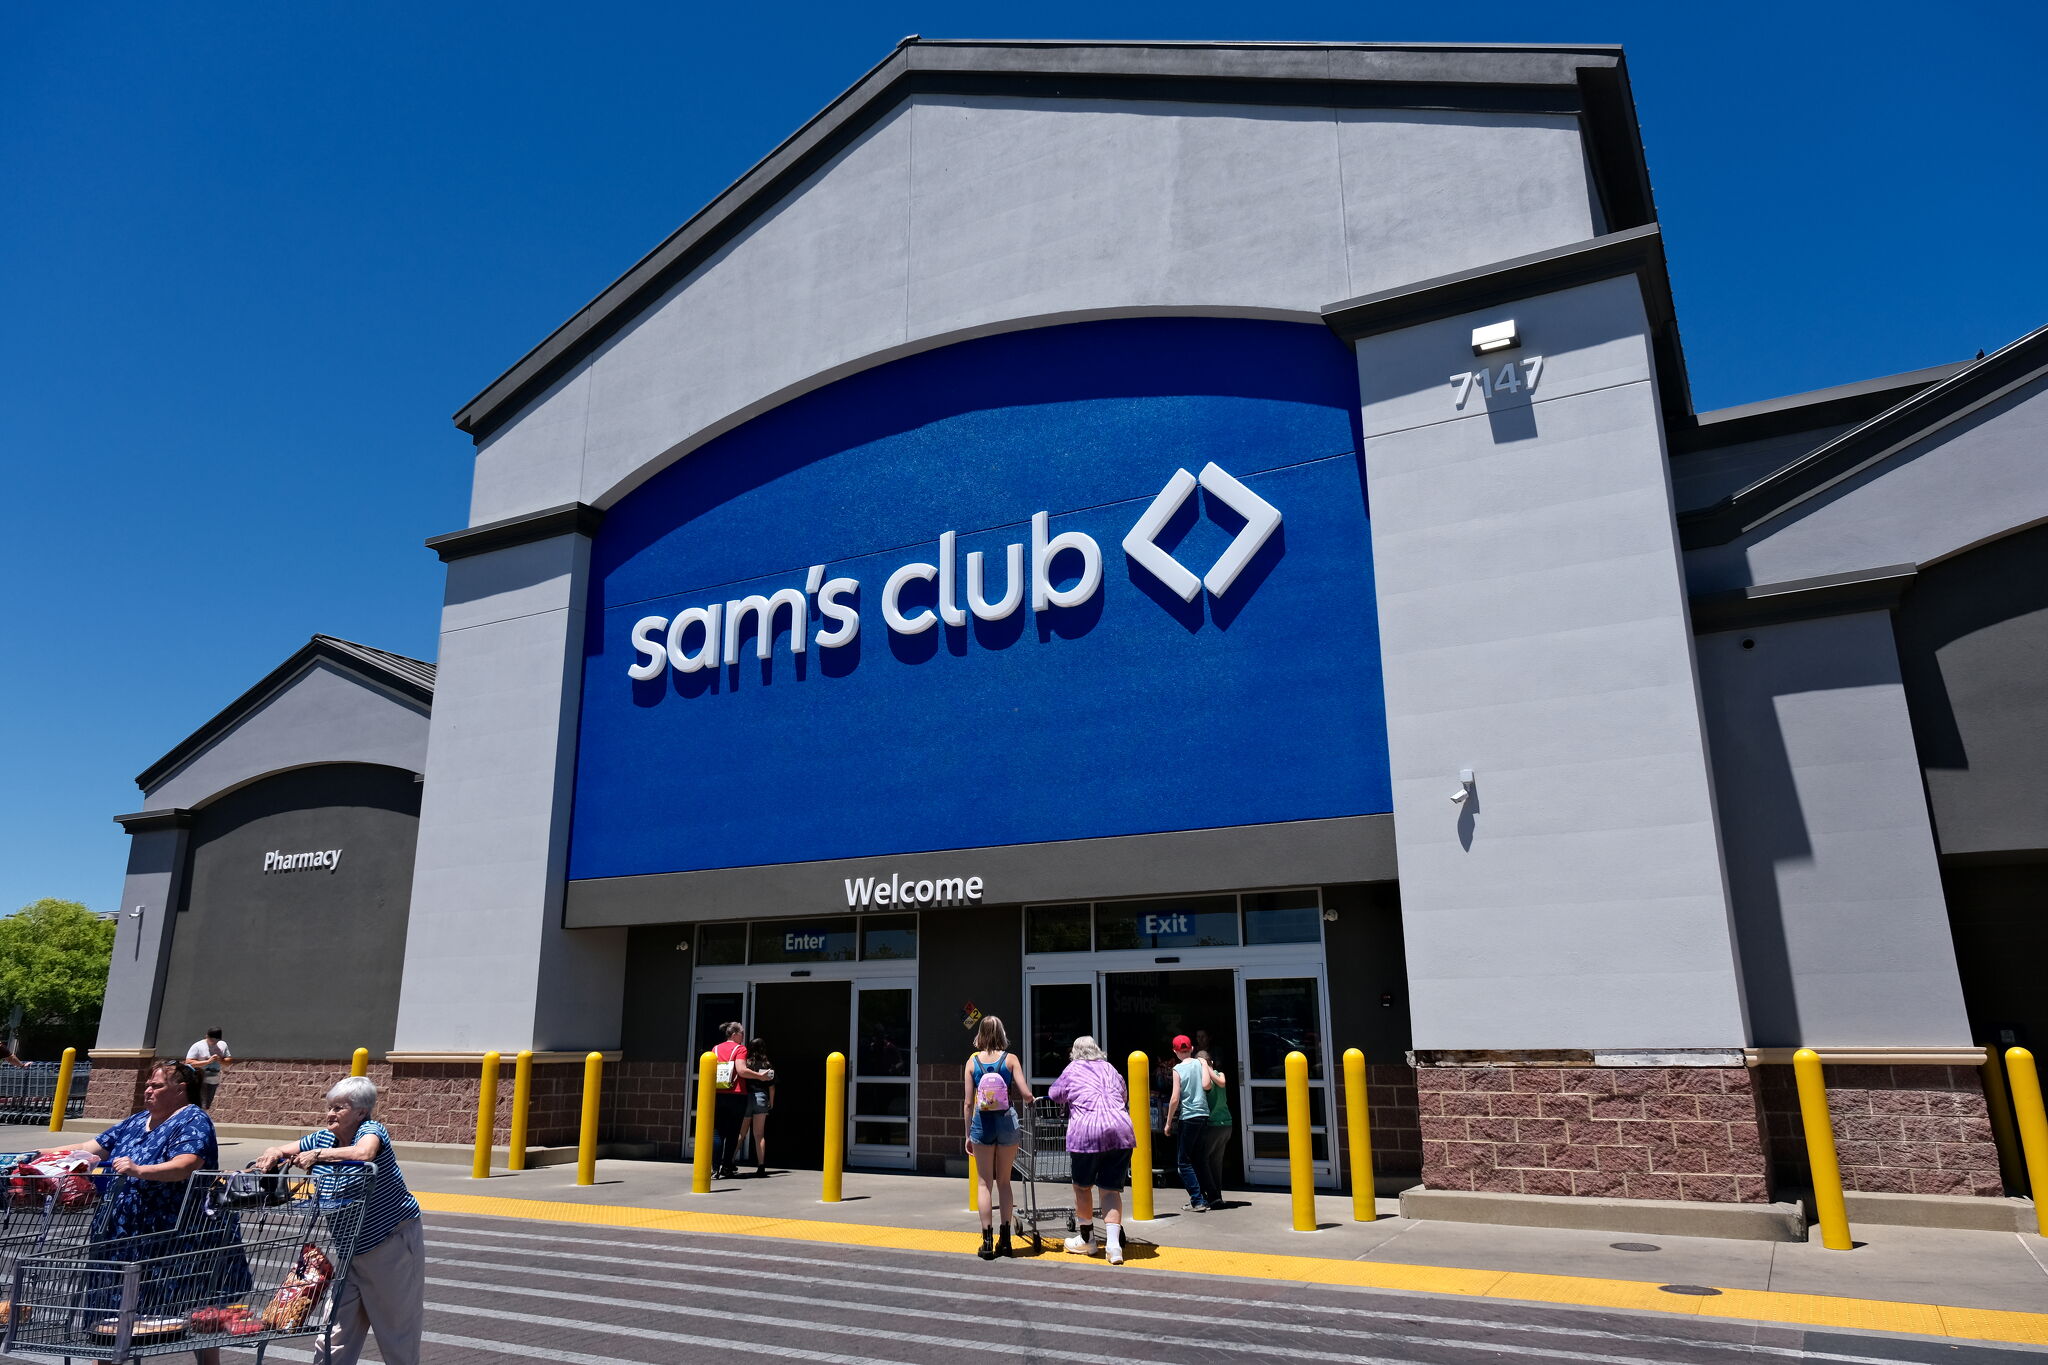 get-a-1-year-sam-s-club-membership-for-25-with-this-deal